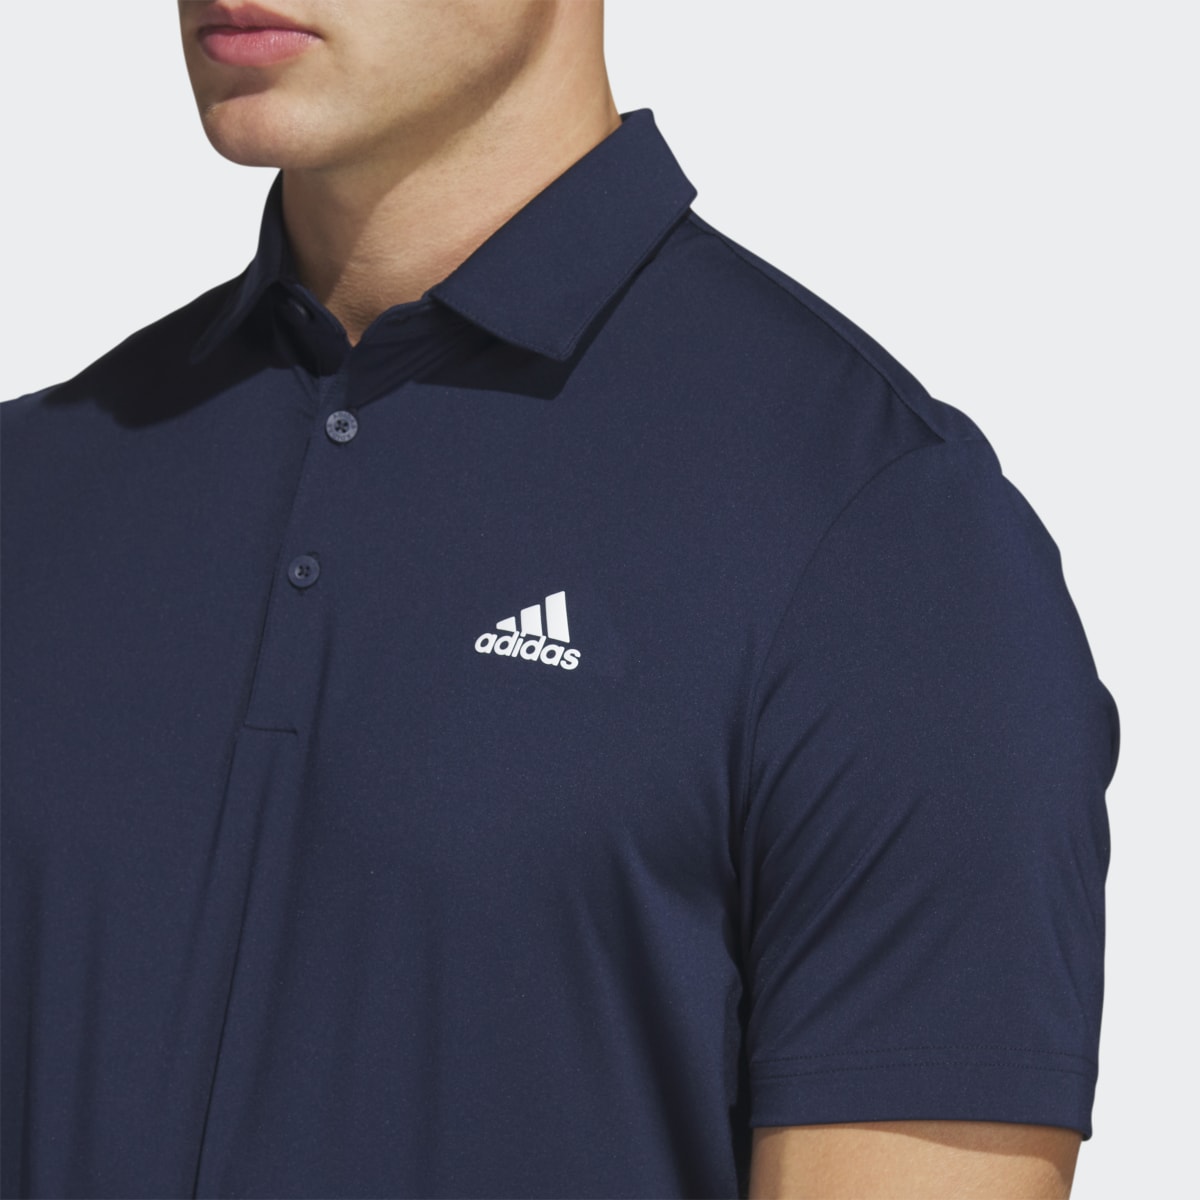 Adidas Ultimate365 Solid Left Chest Poloshirt. 6